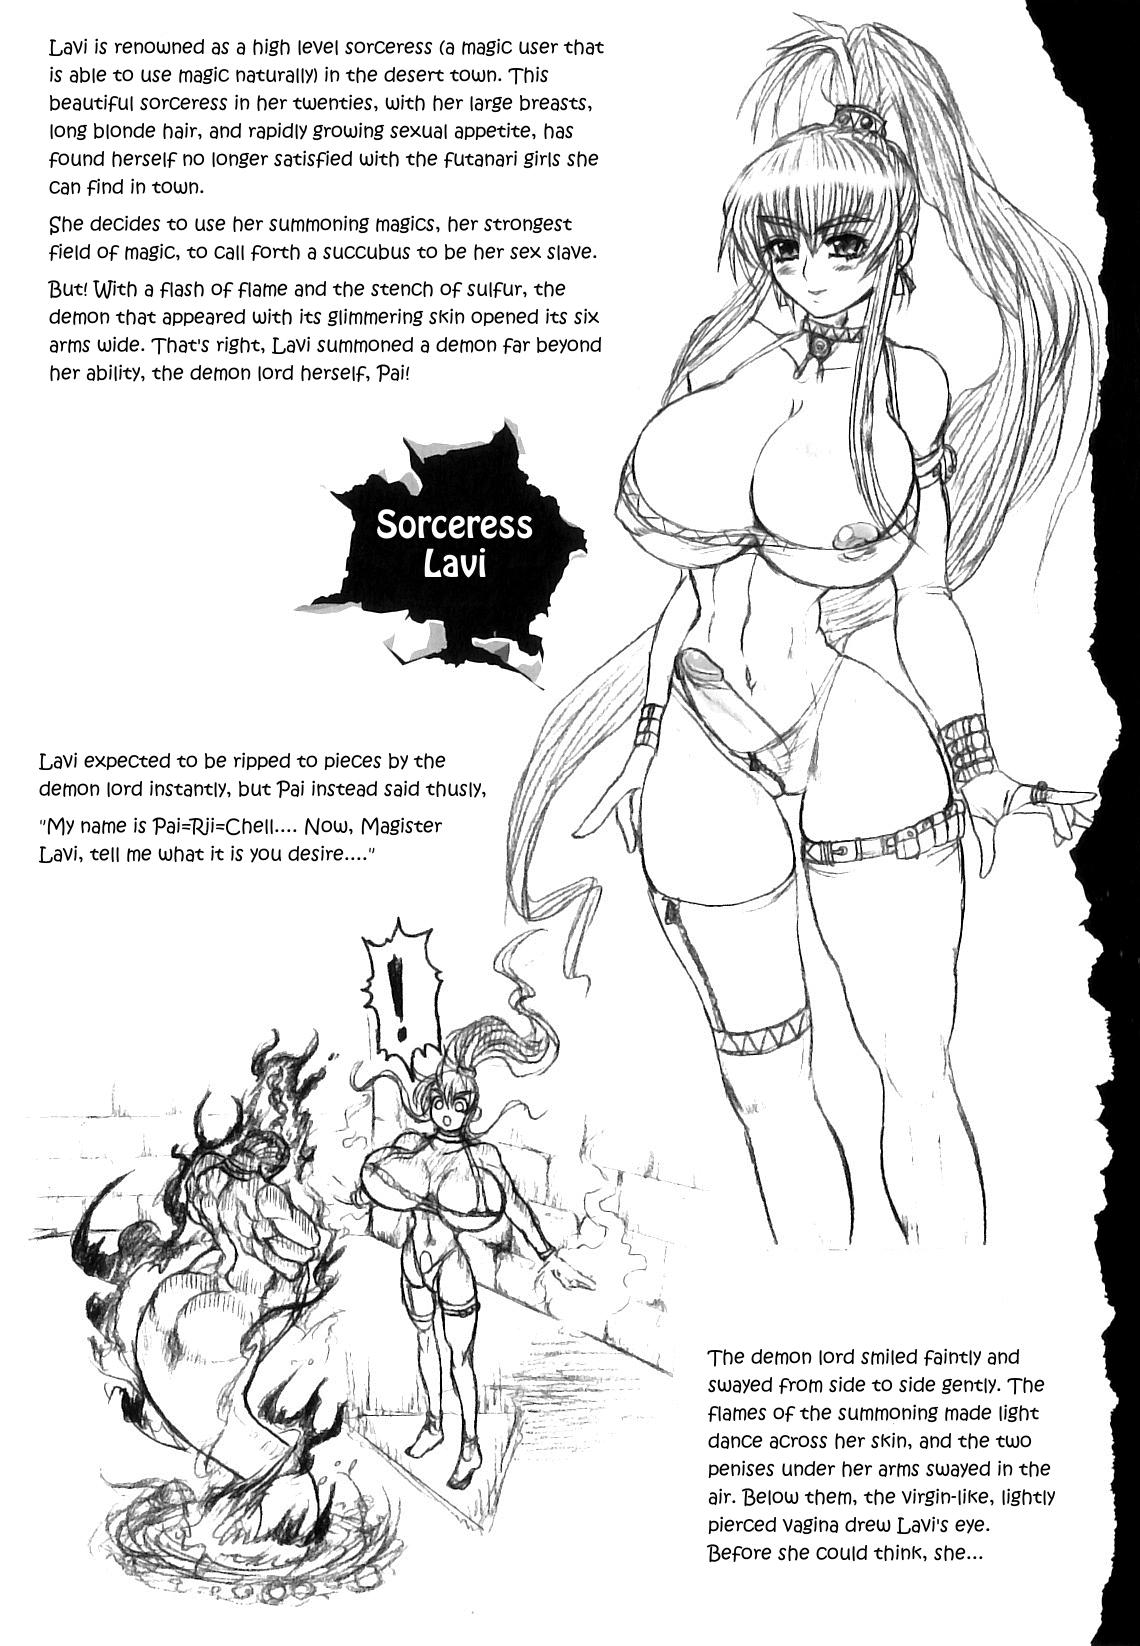 Sex With a Snake Demon + Character Profiles 2